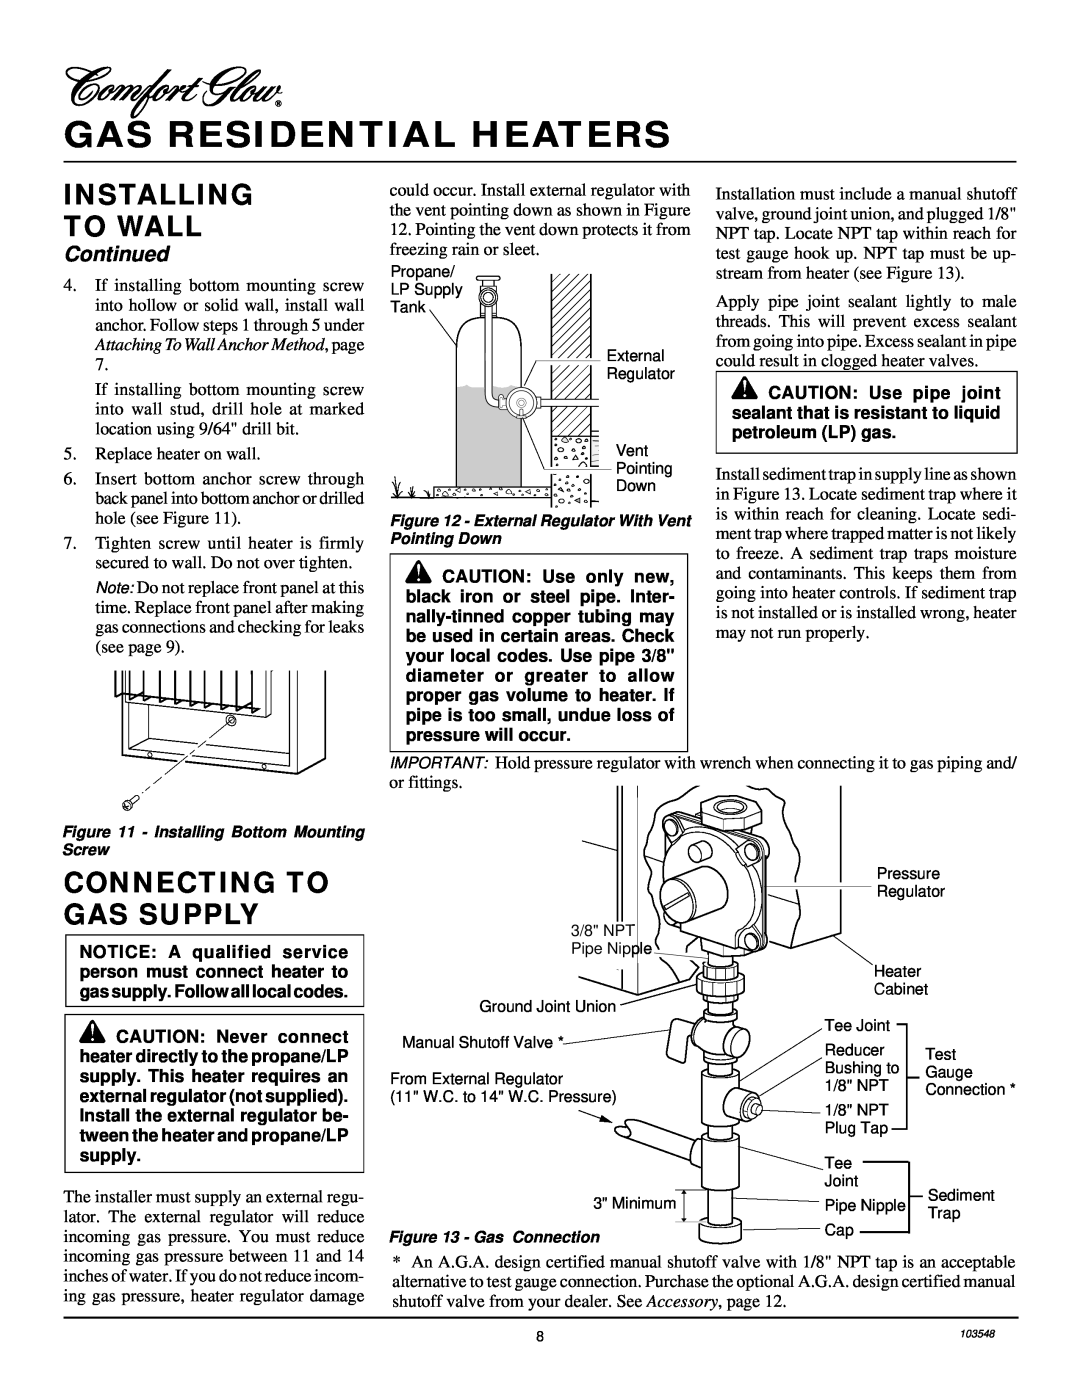 Desa CGP10RL installation manual Connecting To Gas Supply, Gas Residential Heaters, Installing To Wall, Continued 